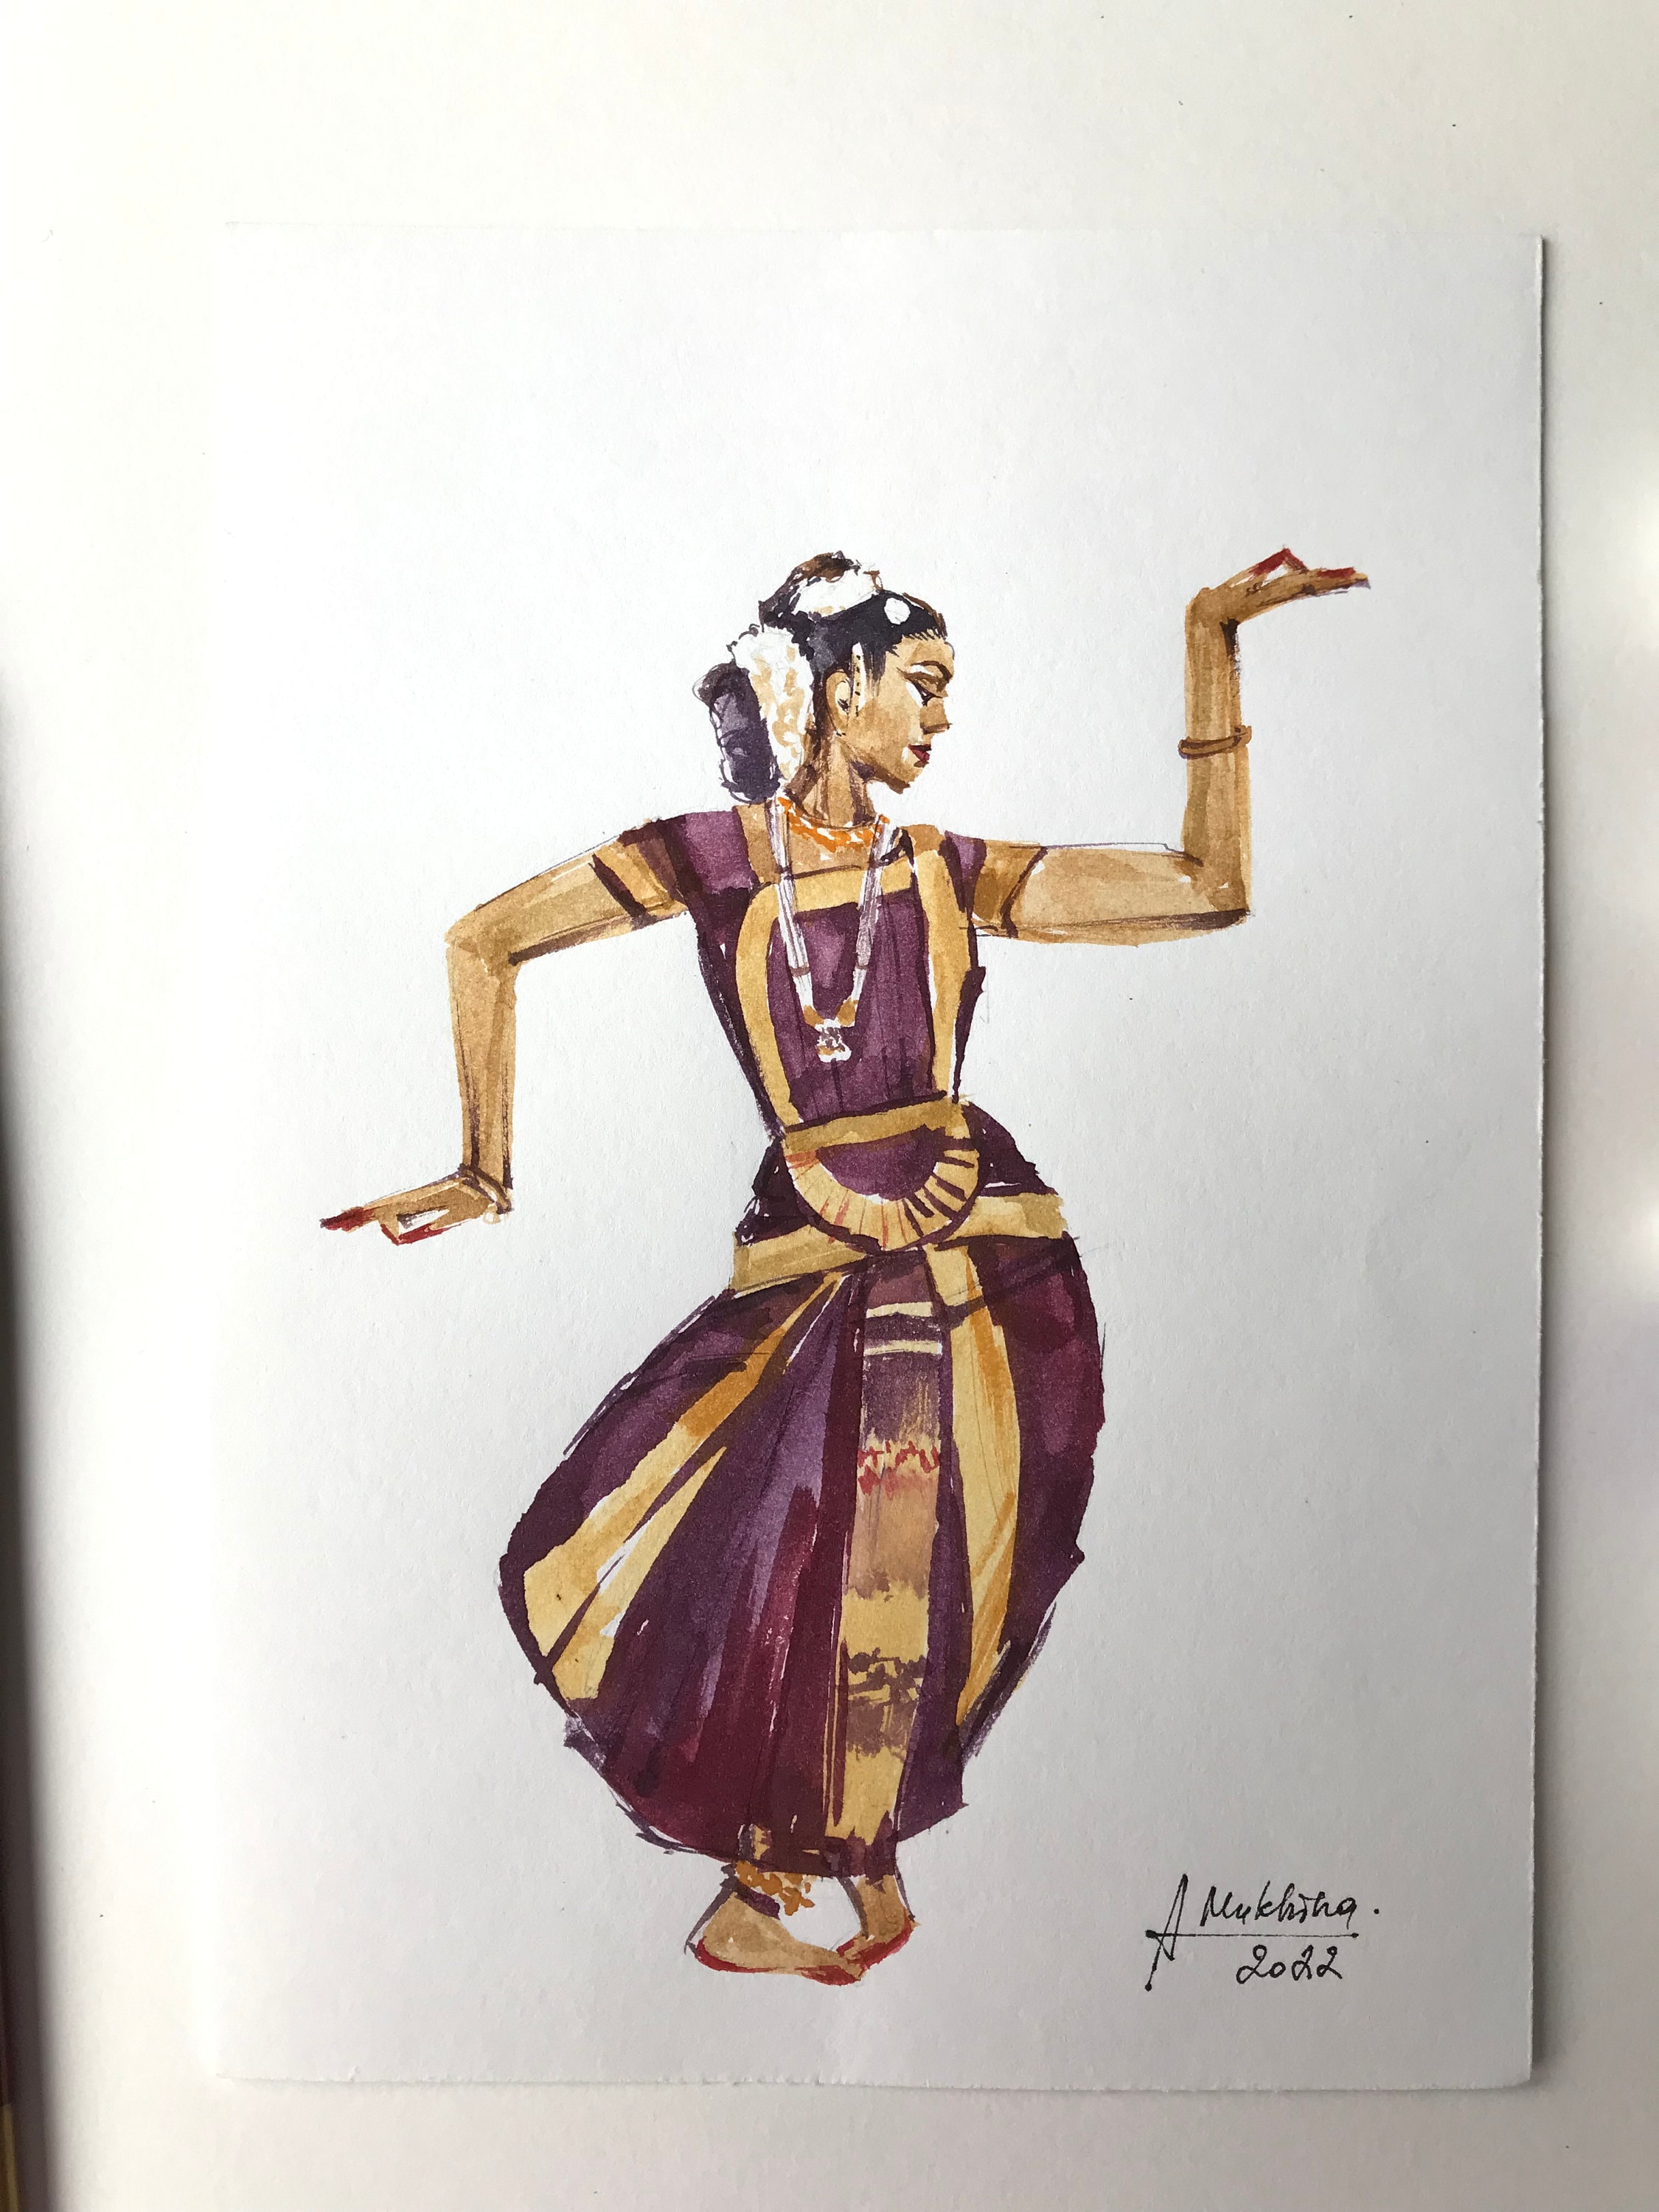 CROQUIS OF INDIAN CLOTHING SKETCHES  Steemit